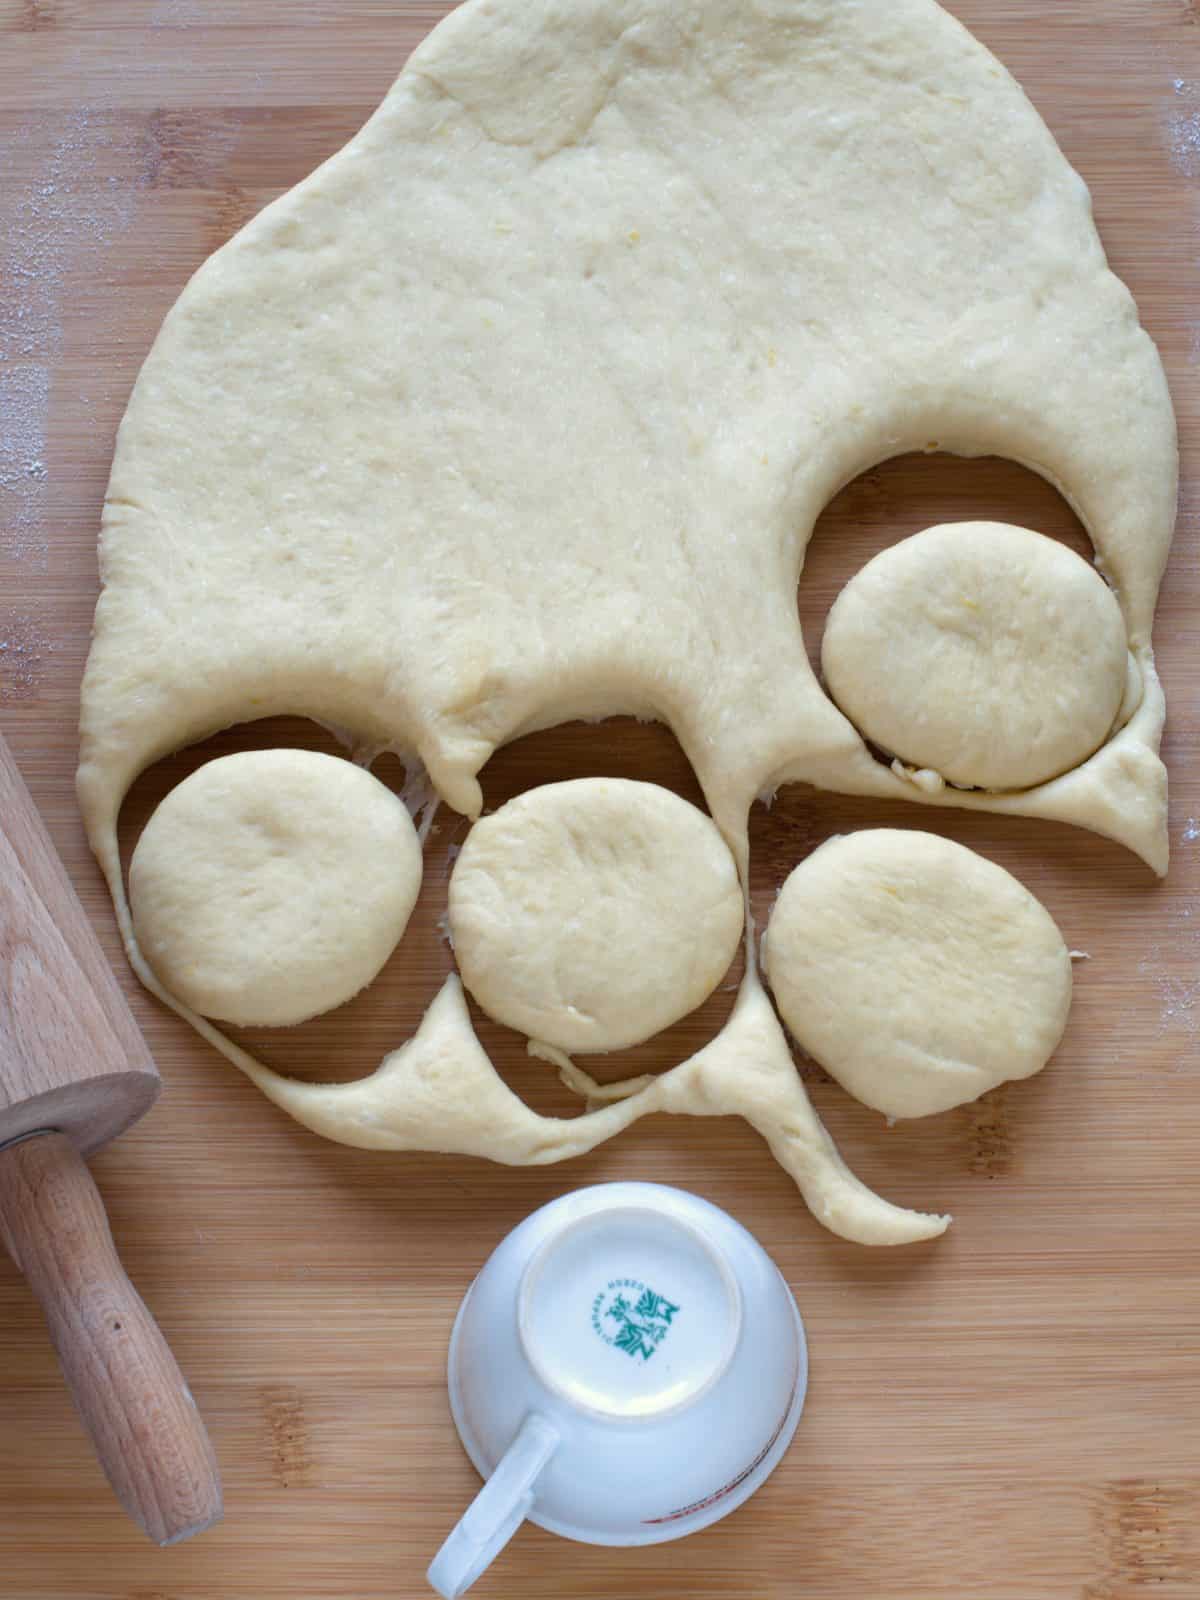 Cutting rounds from yeasted dough.